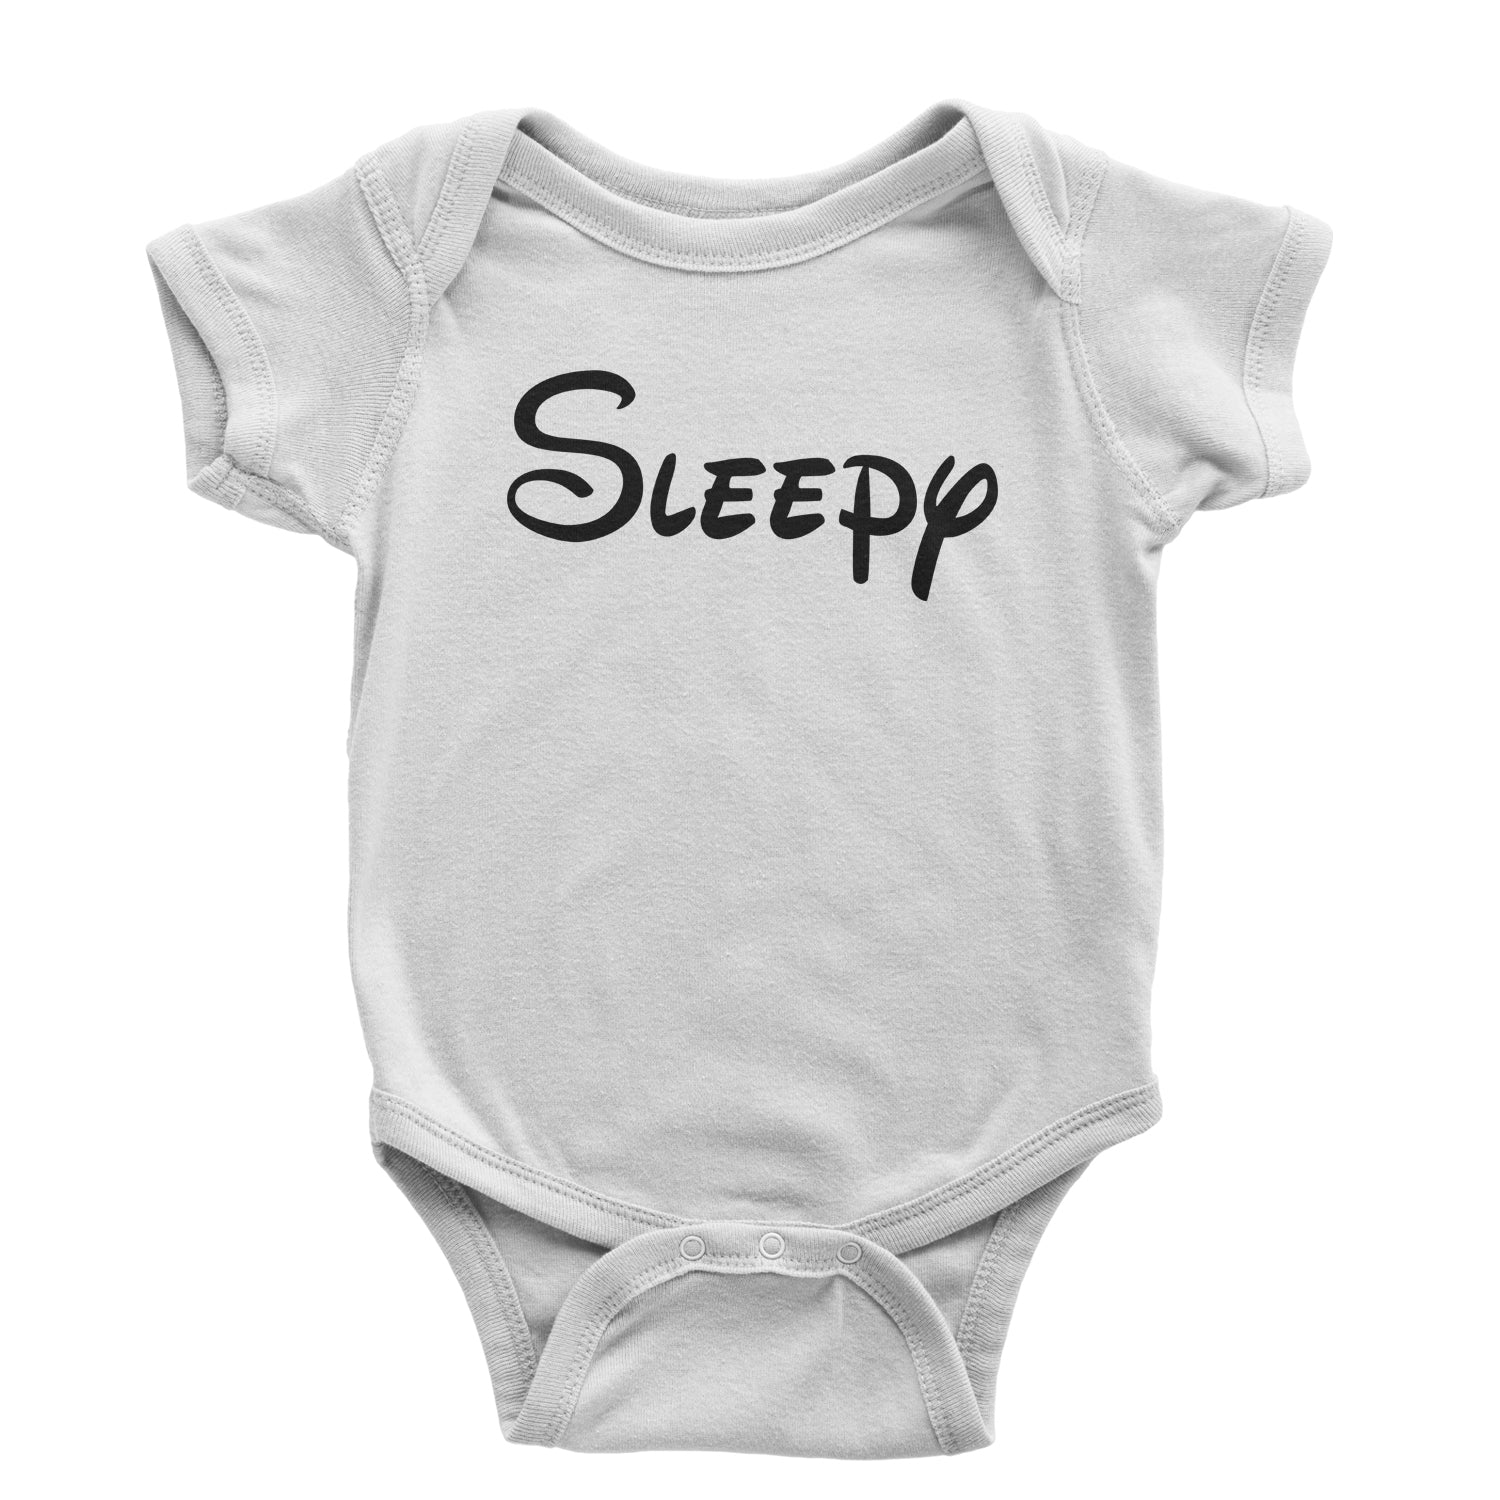 Sleepy - 7 Dwarfs Costume Infant One-Piece Romper Bodysuit and, costume, dwarfs, group, halloween, matching, seven, snow, the, white by Expression Tees